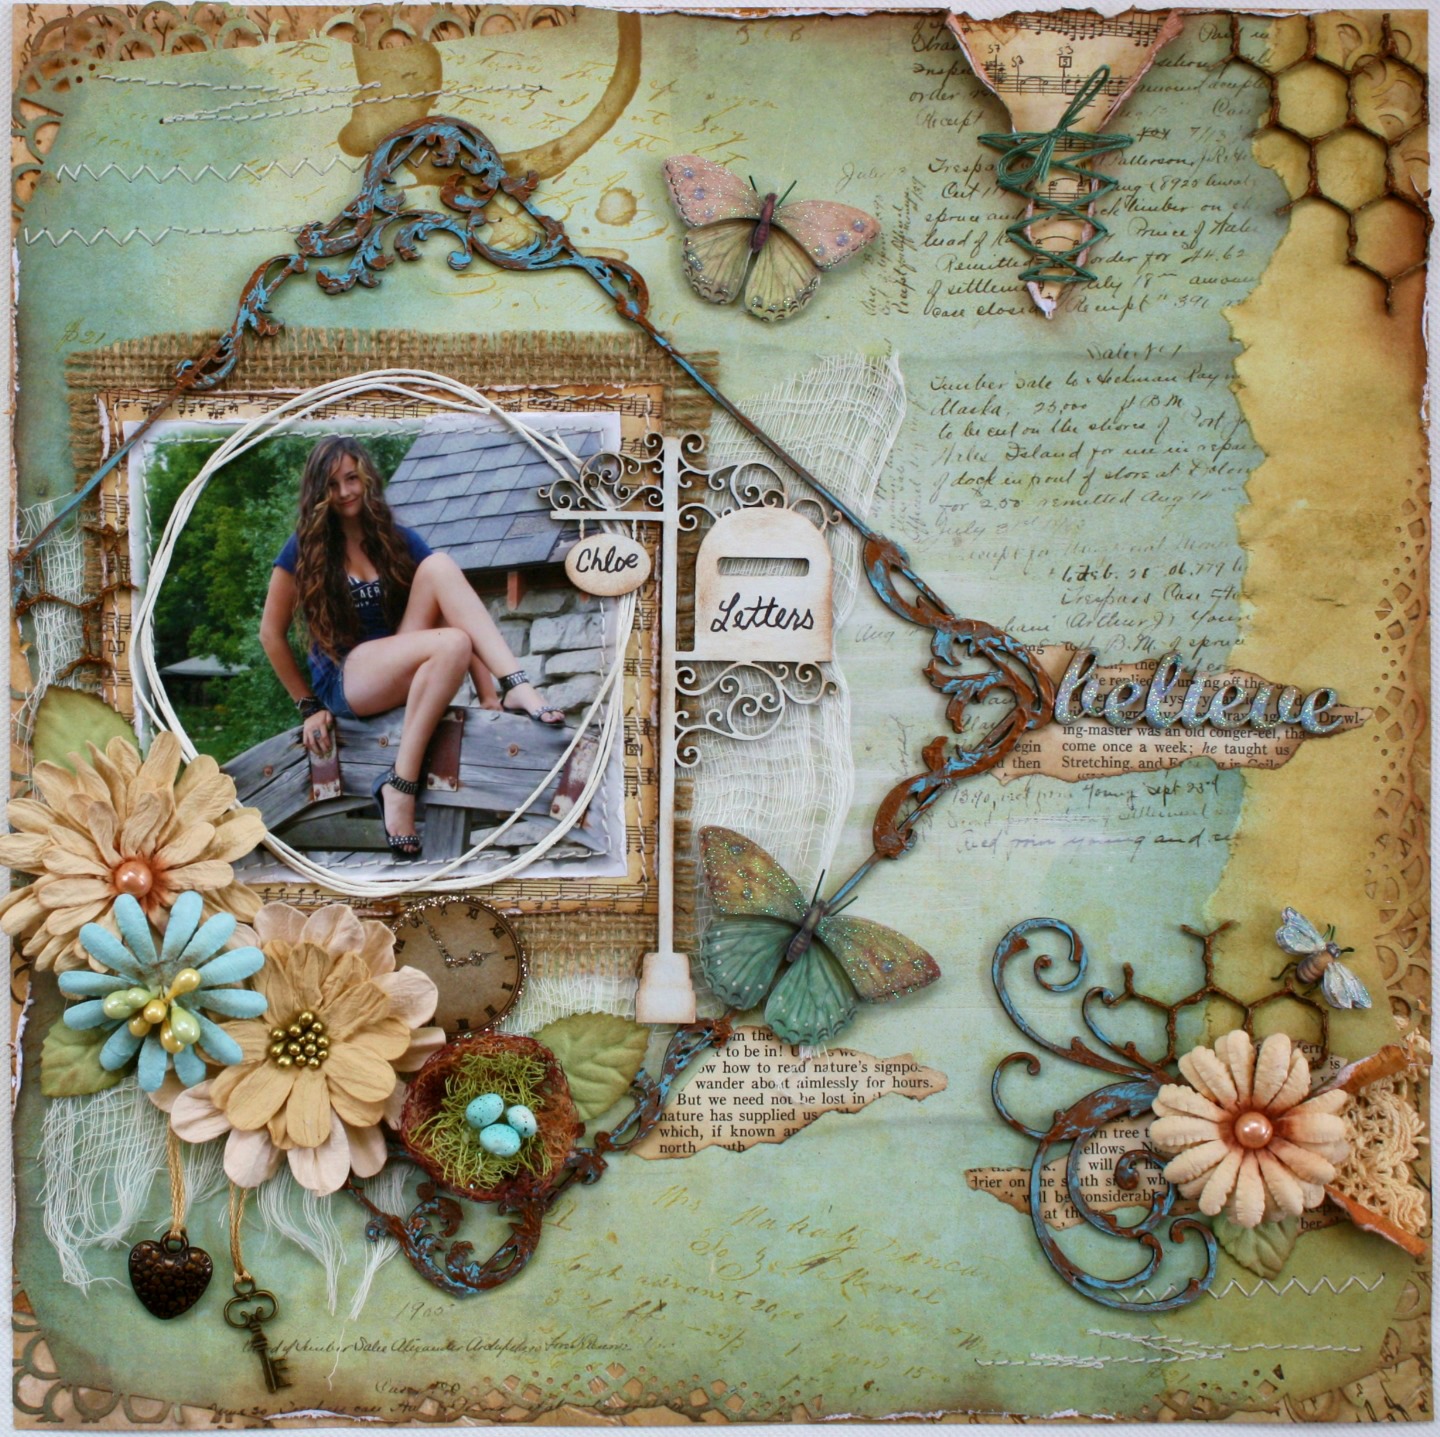 Such a Pretty Mess: Another Layout in Australian Scrapbook Idea's Magazine!